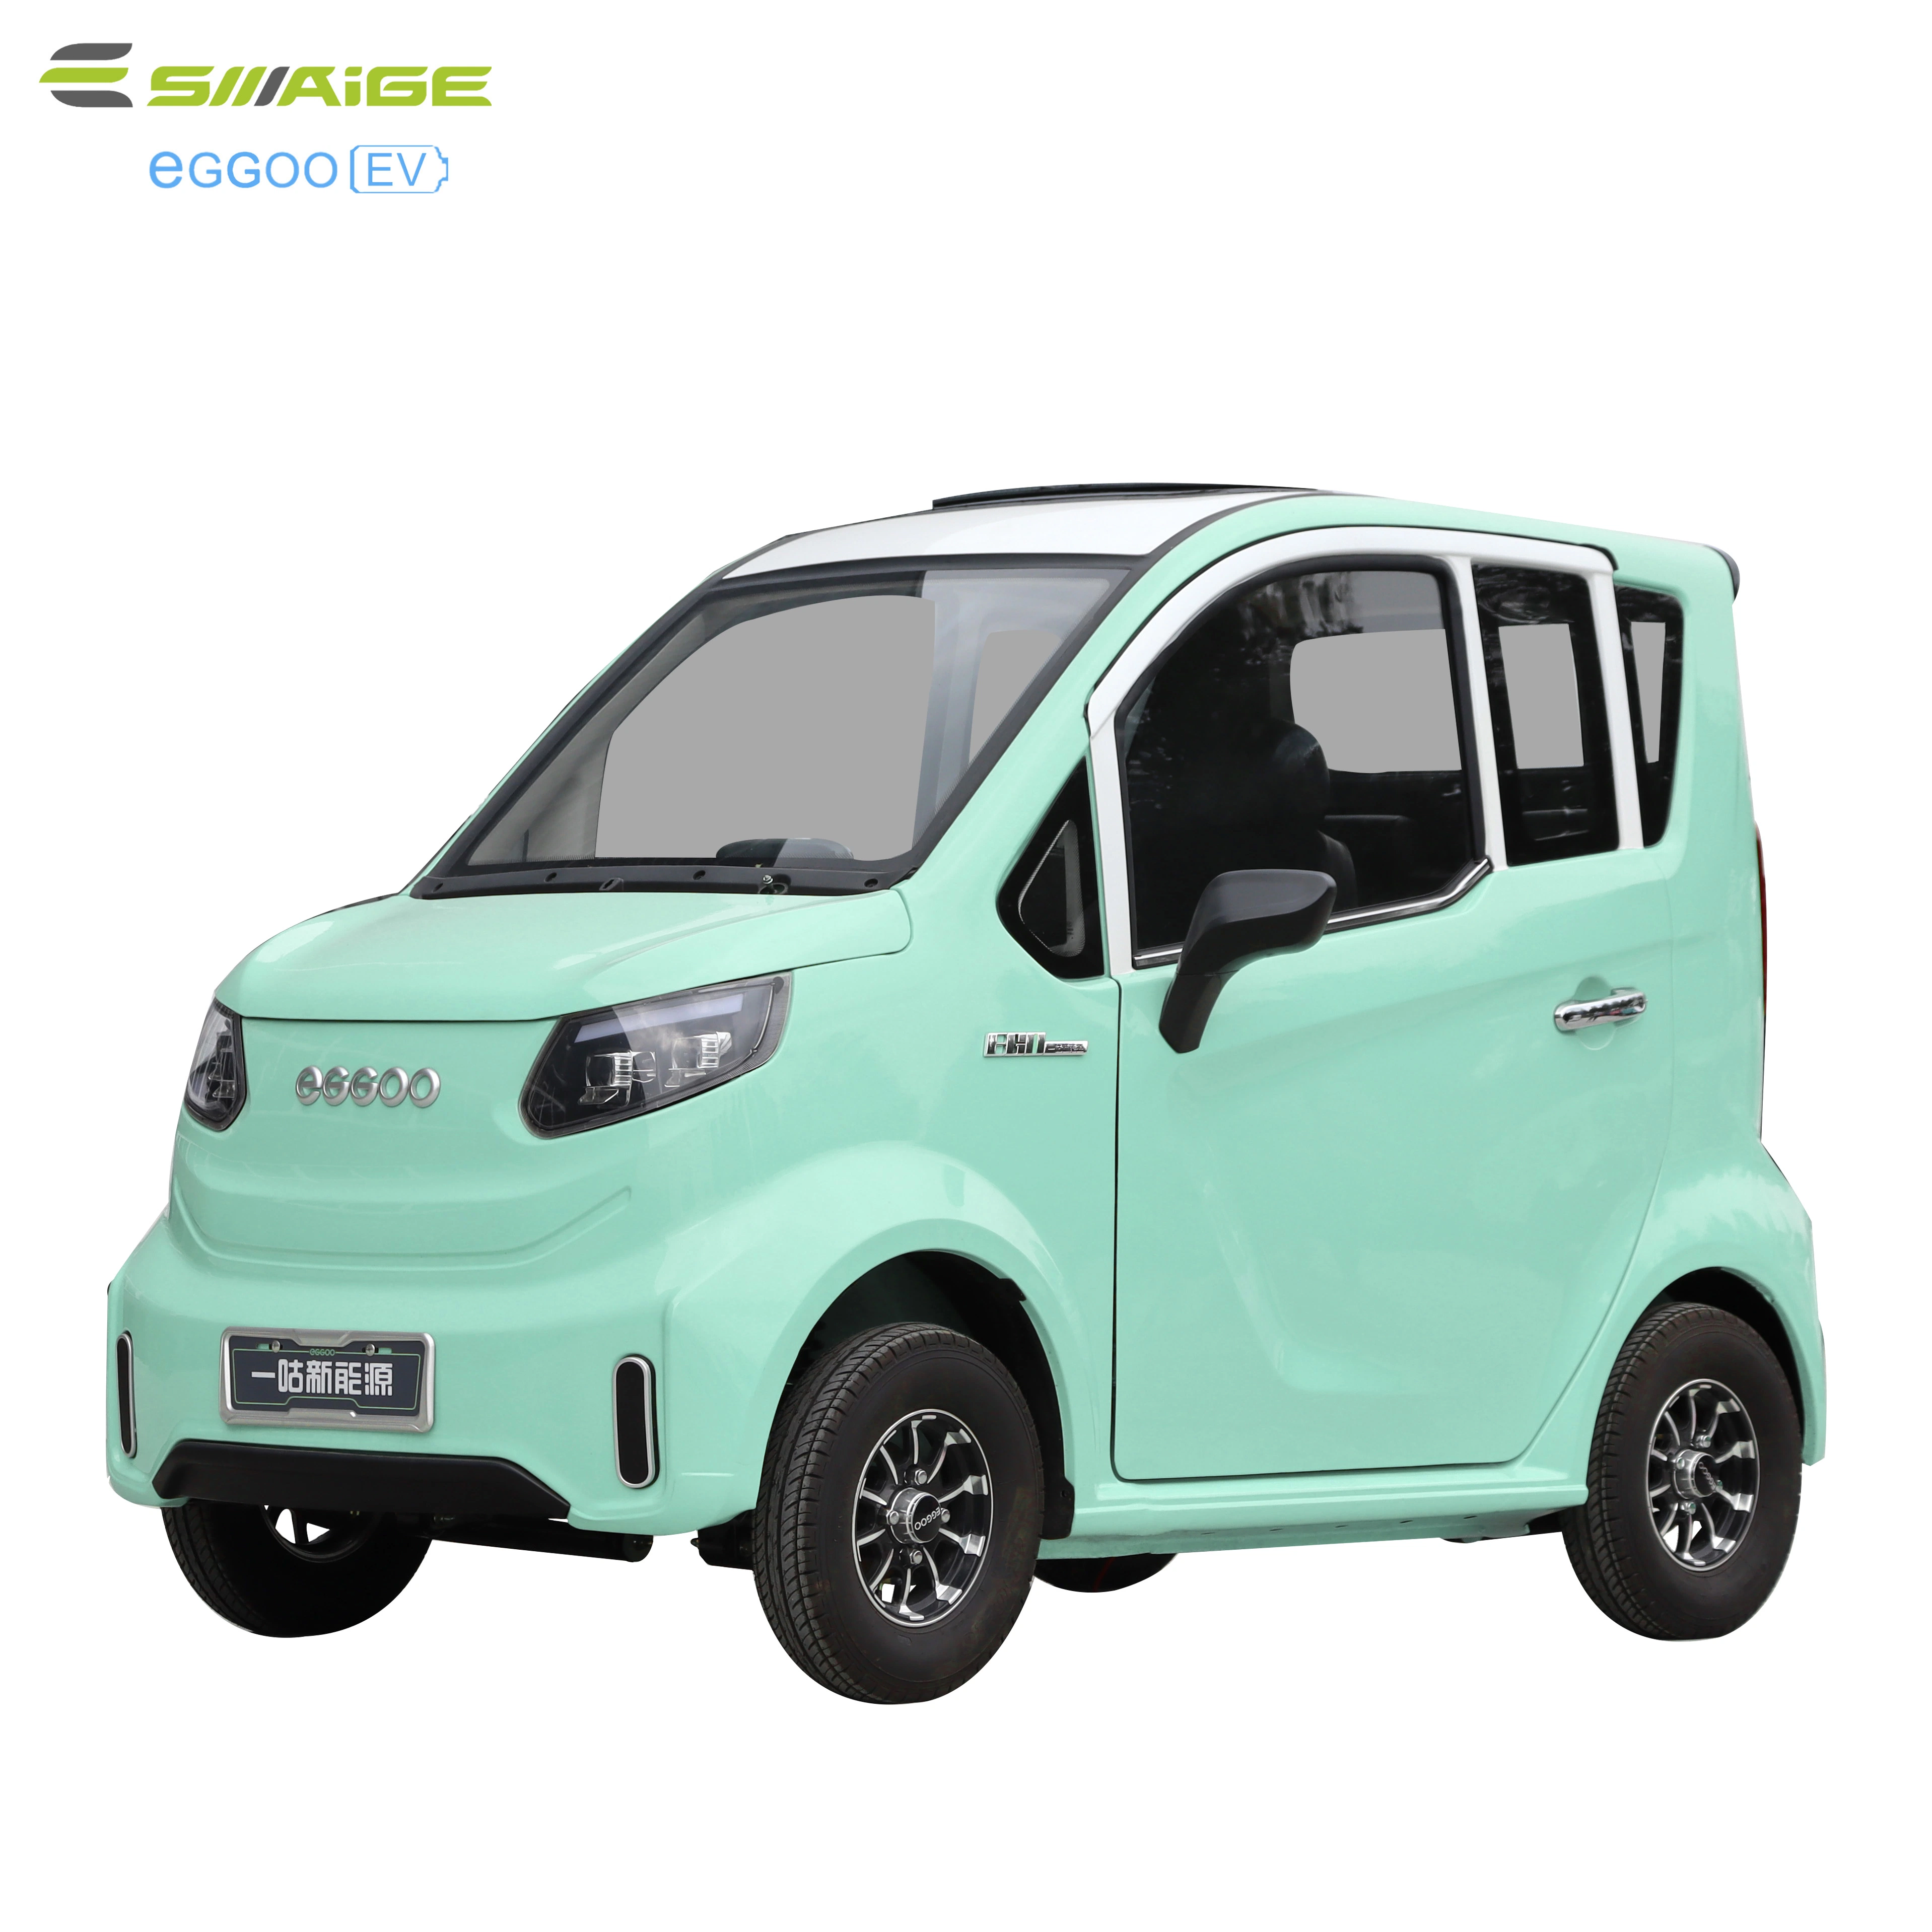 4-Seat Electric Car with 45km/H 1500W Motor and Lead Acid Battery or Lithium Battery New Energy with Rear View Camera